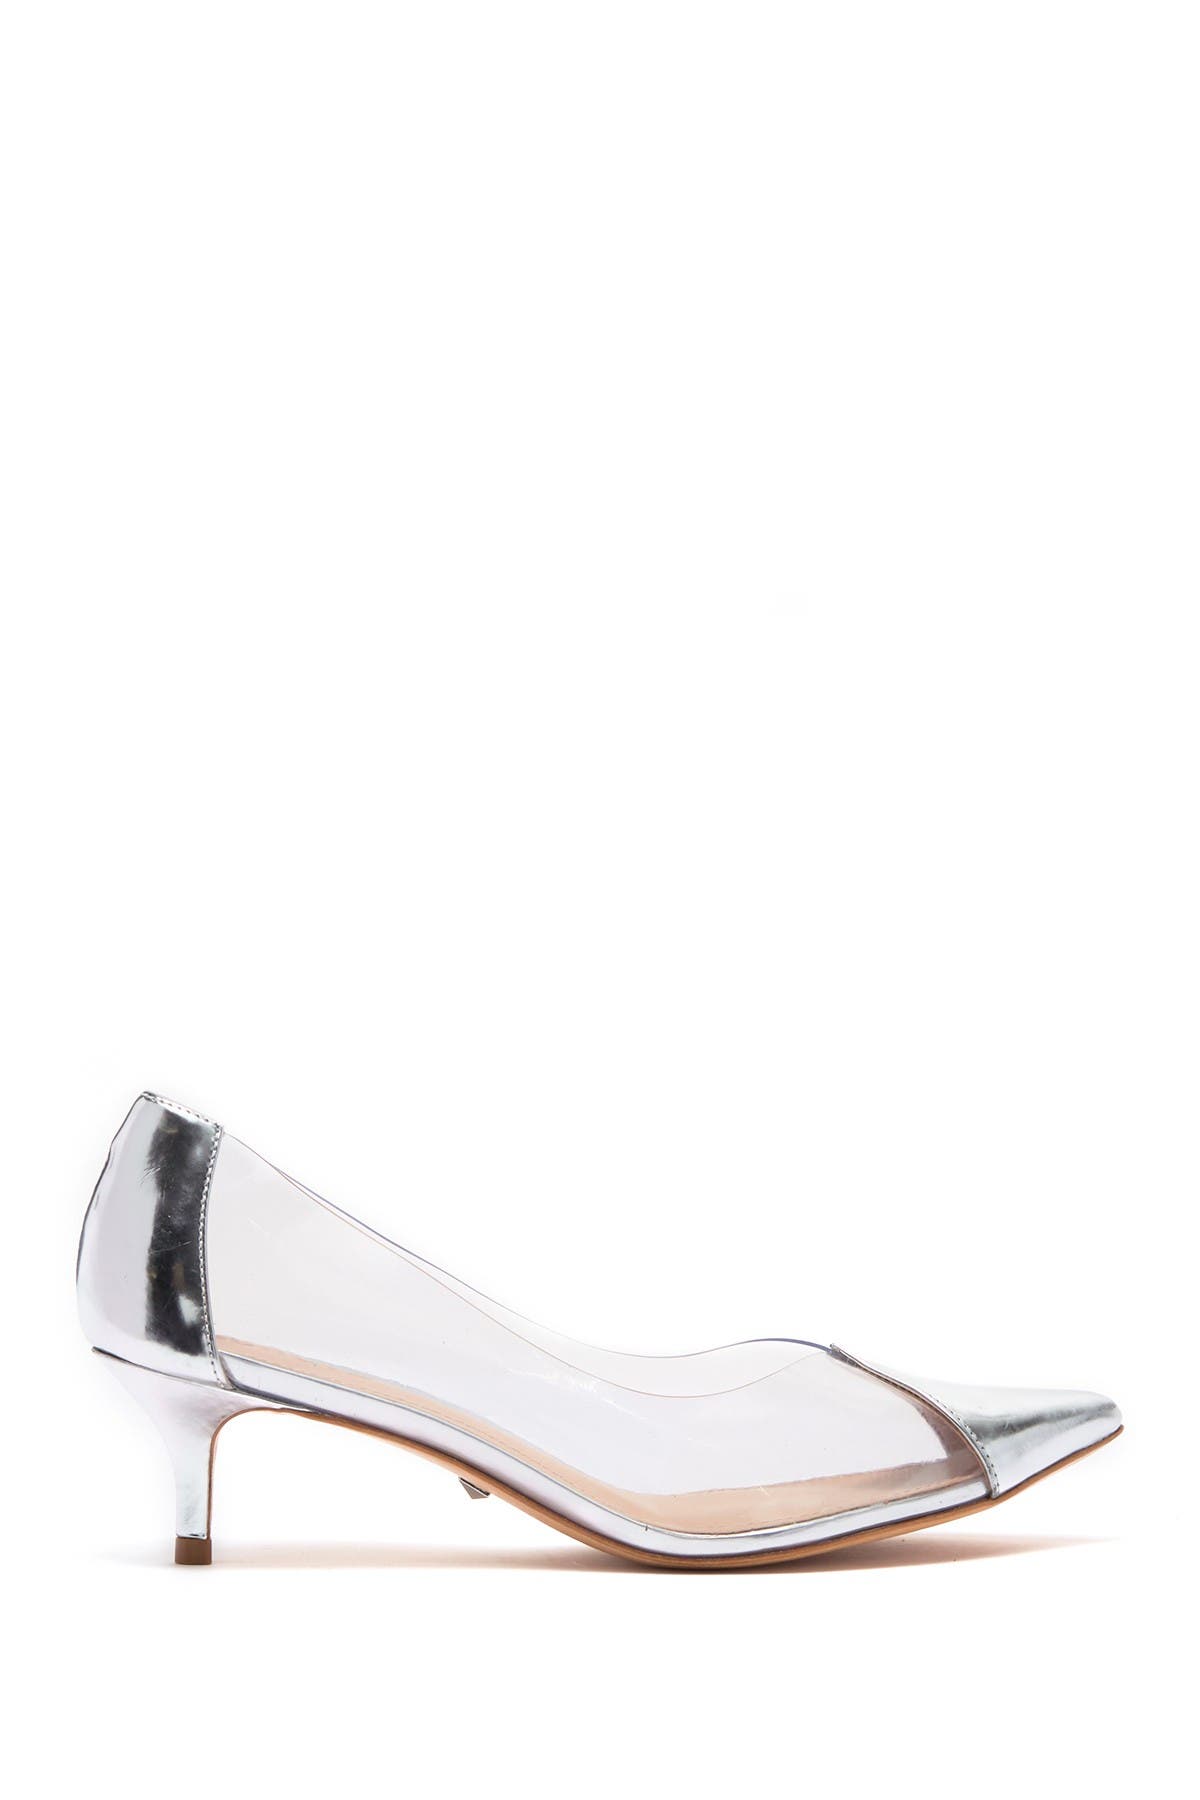 cyou clear pointy toe pump